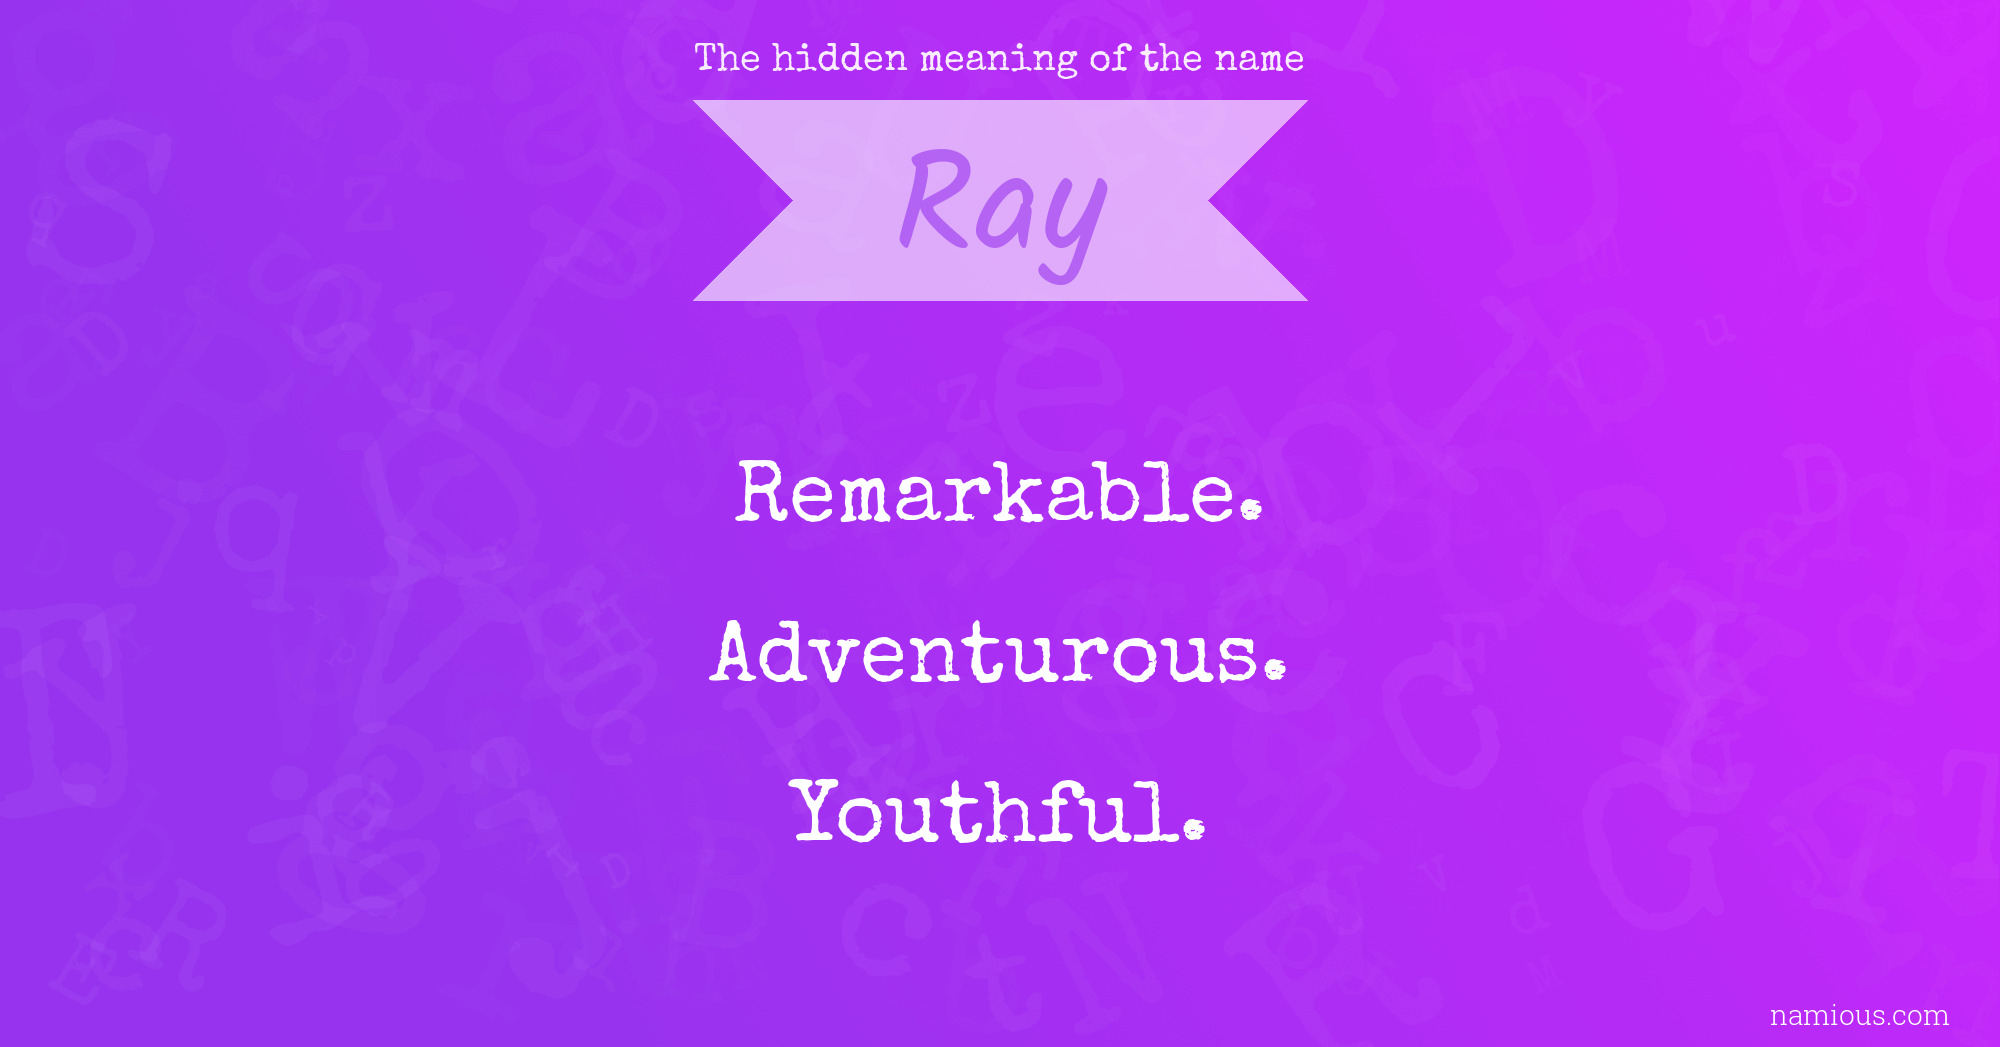 The hidden meaning of the name Ray